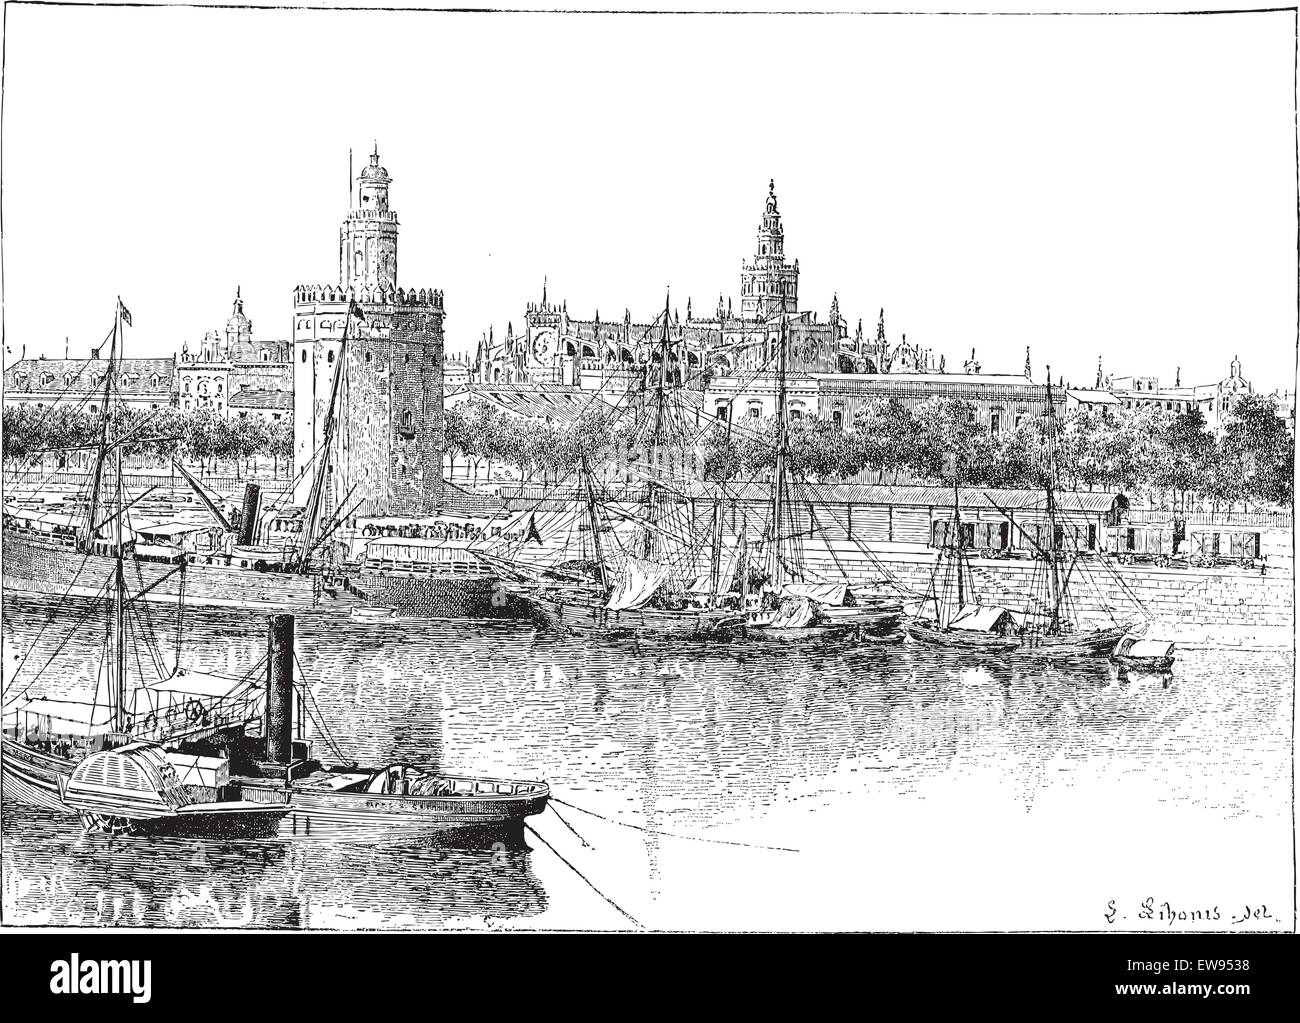 View of Seville, Spain, vintage engraved illustration. Dictionary of words and things - Larive and Fleury - 1895. Stock Vector